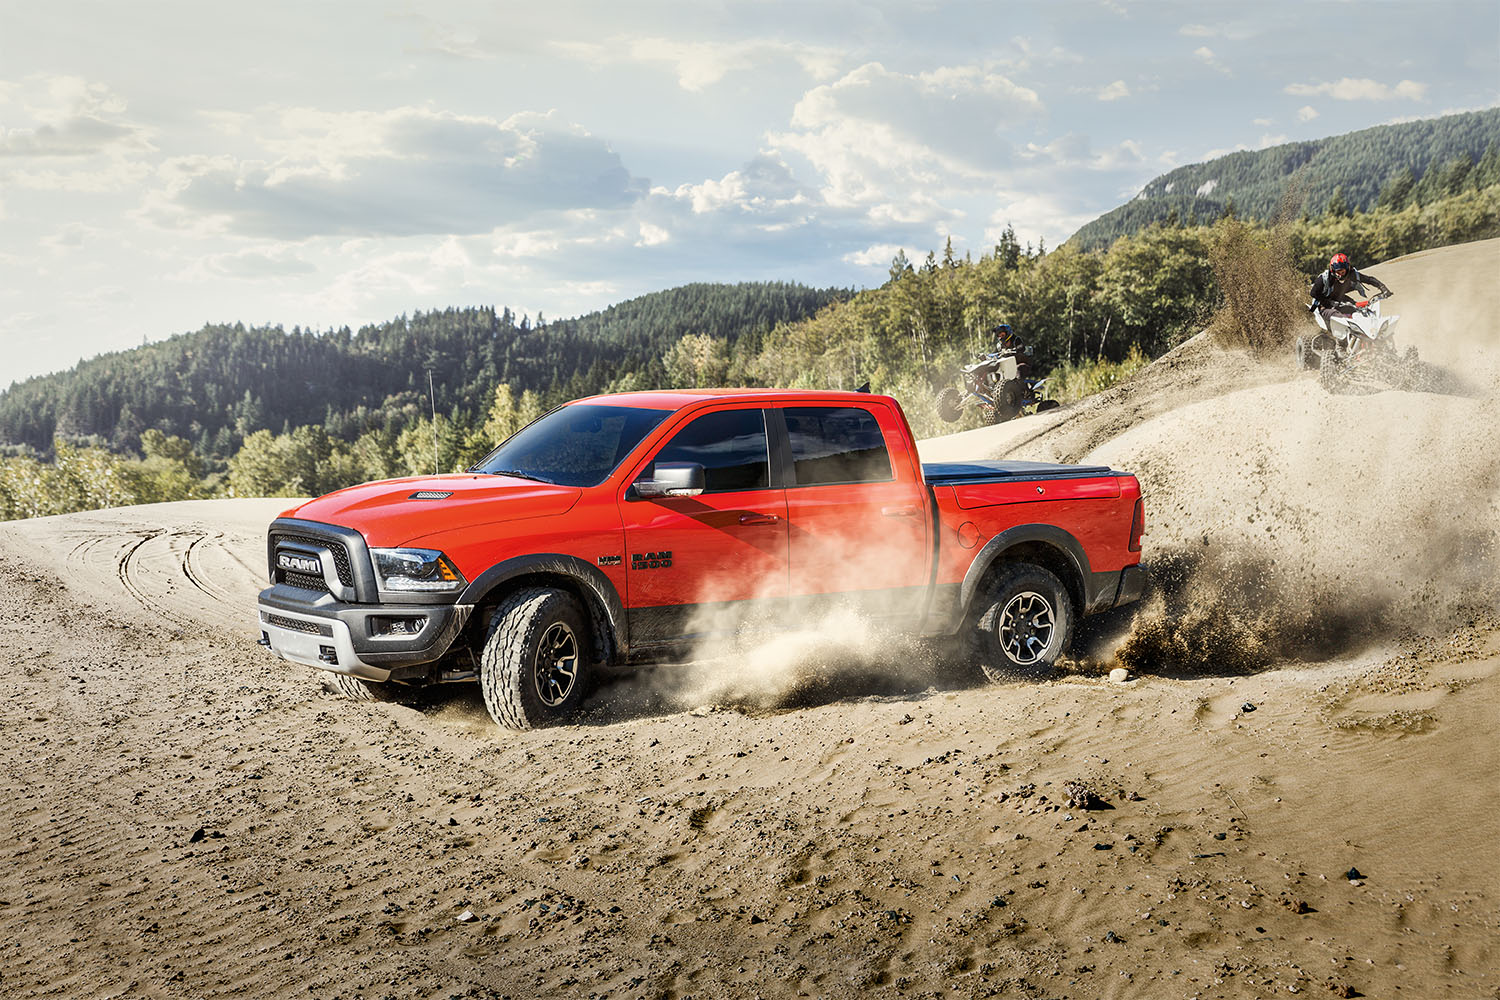 New Ram available in Oildale, CA at Haddad Dodge Ram